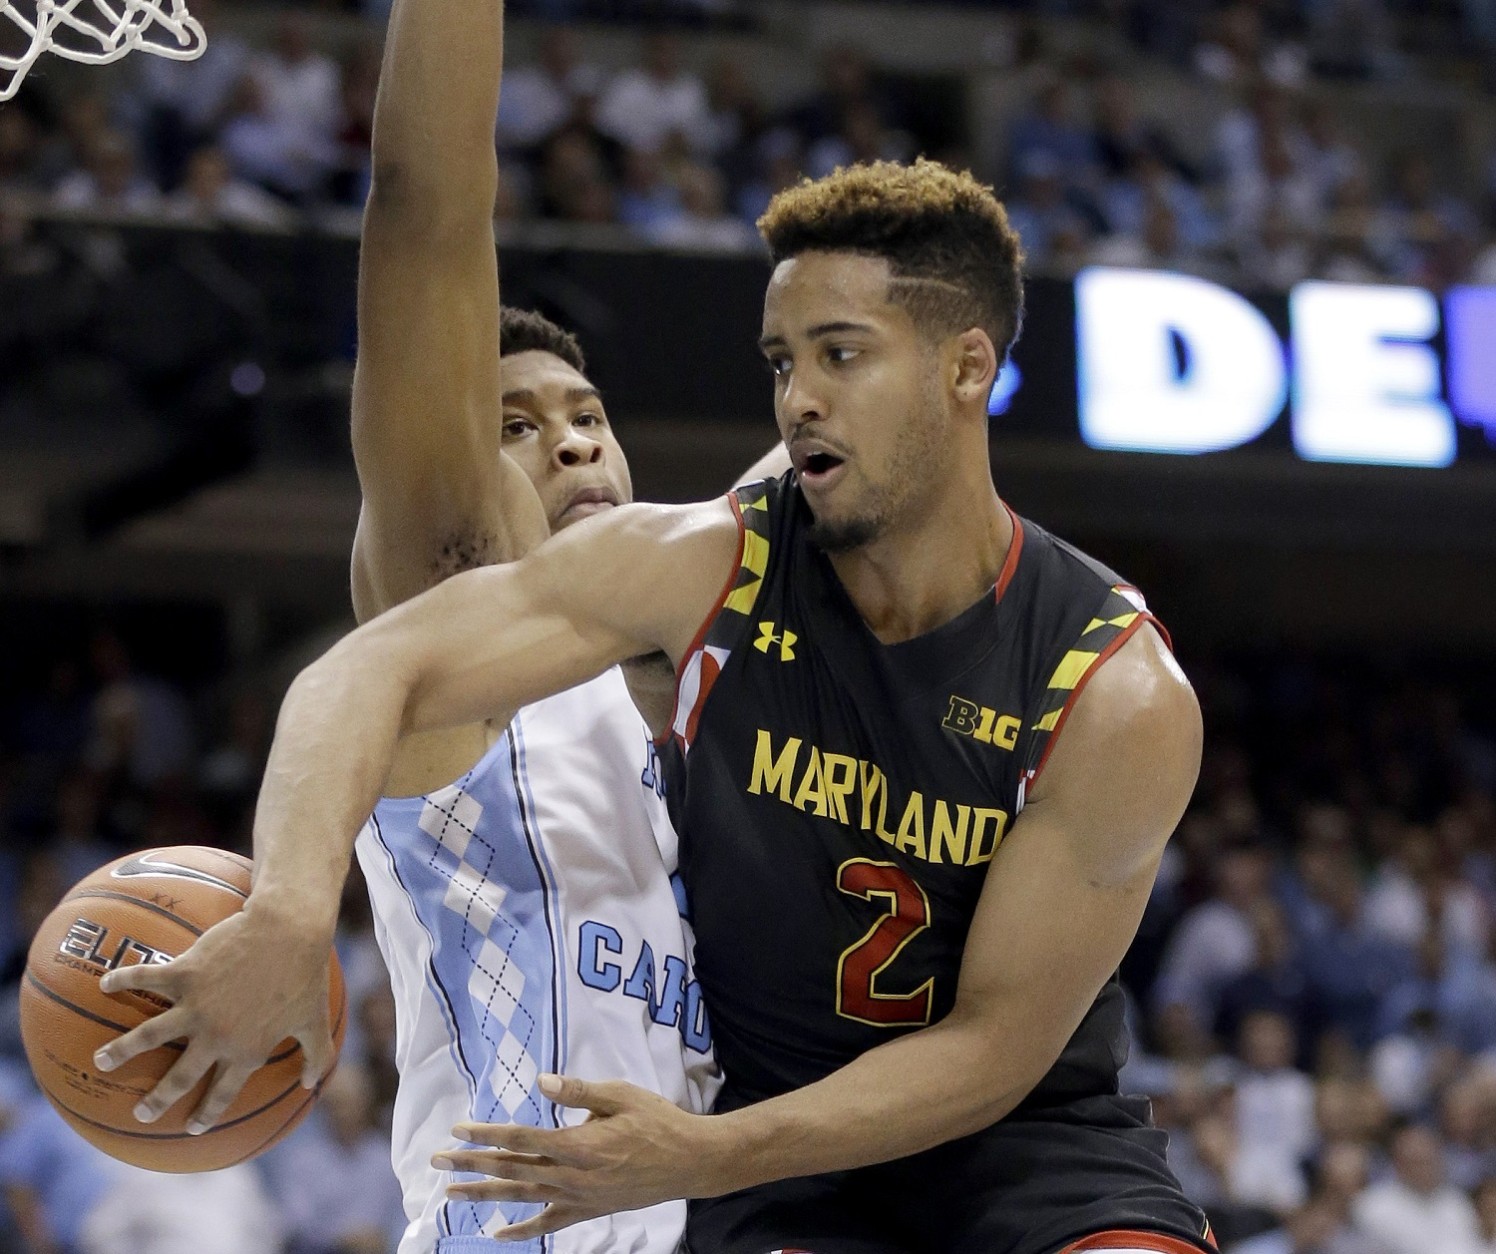 North Carolina's Isaiah Hicks defends against Maryland's Melo Trimble (2) during the second half of an NCAA college basketball game in Chapel Hill, N.C., Tuesday, Dec. 1, 2015. North Carolina won 89-81. (AP Photo/Gerry Broome)